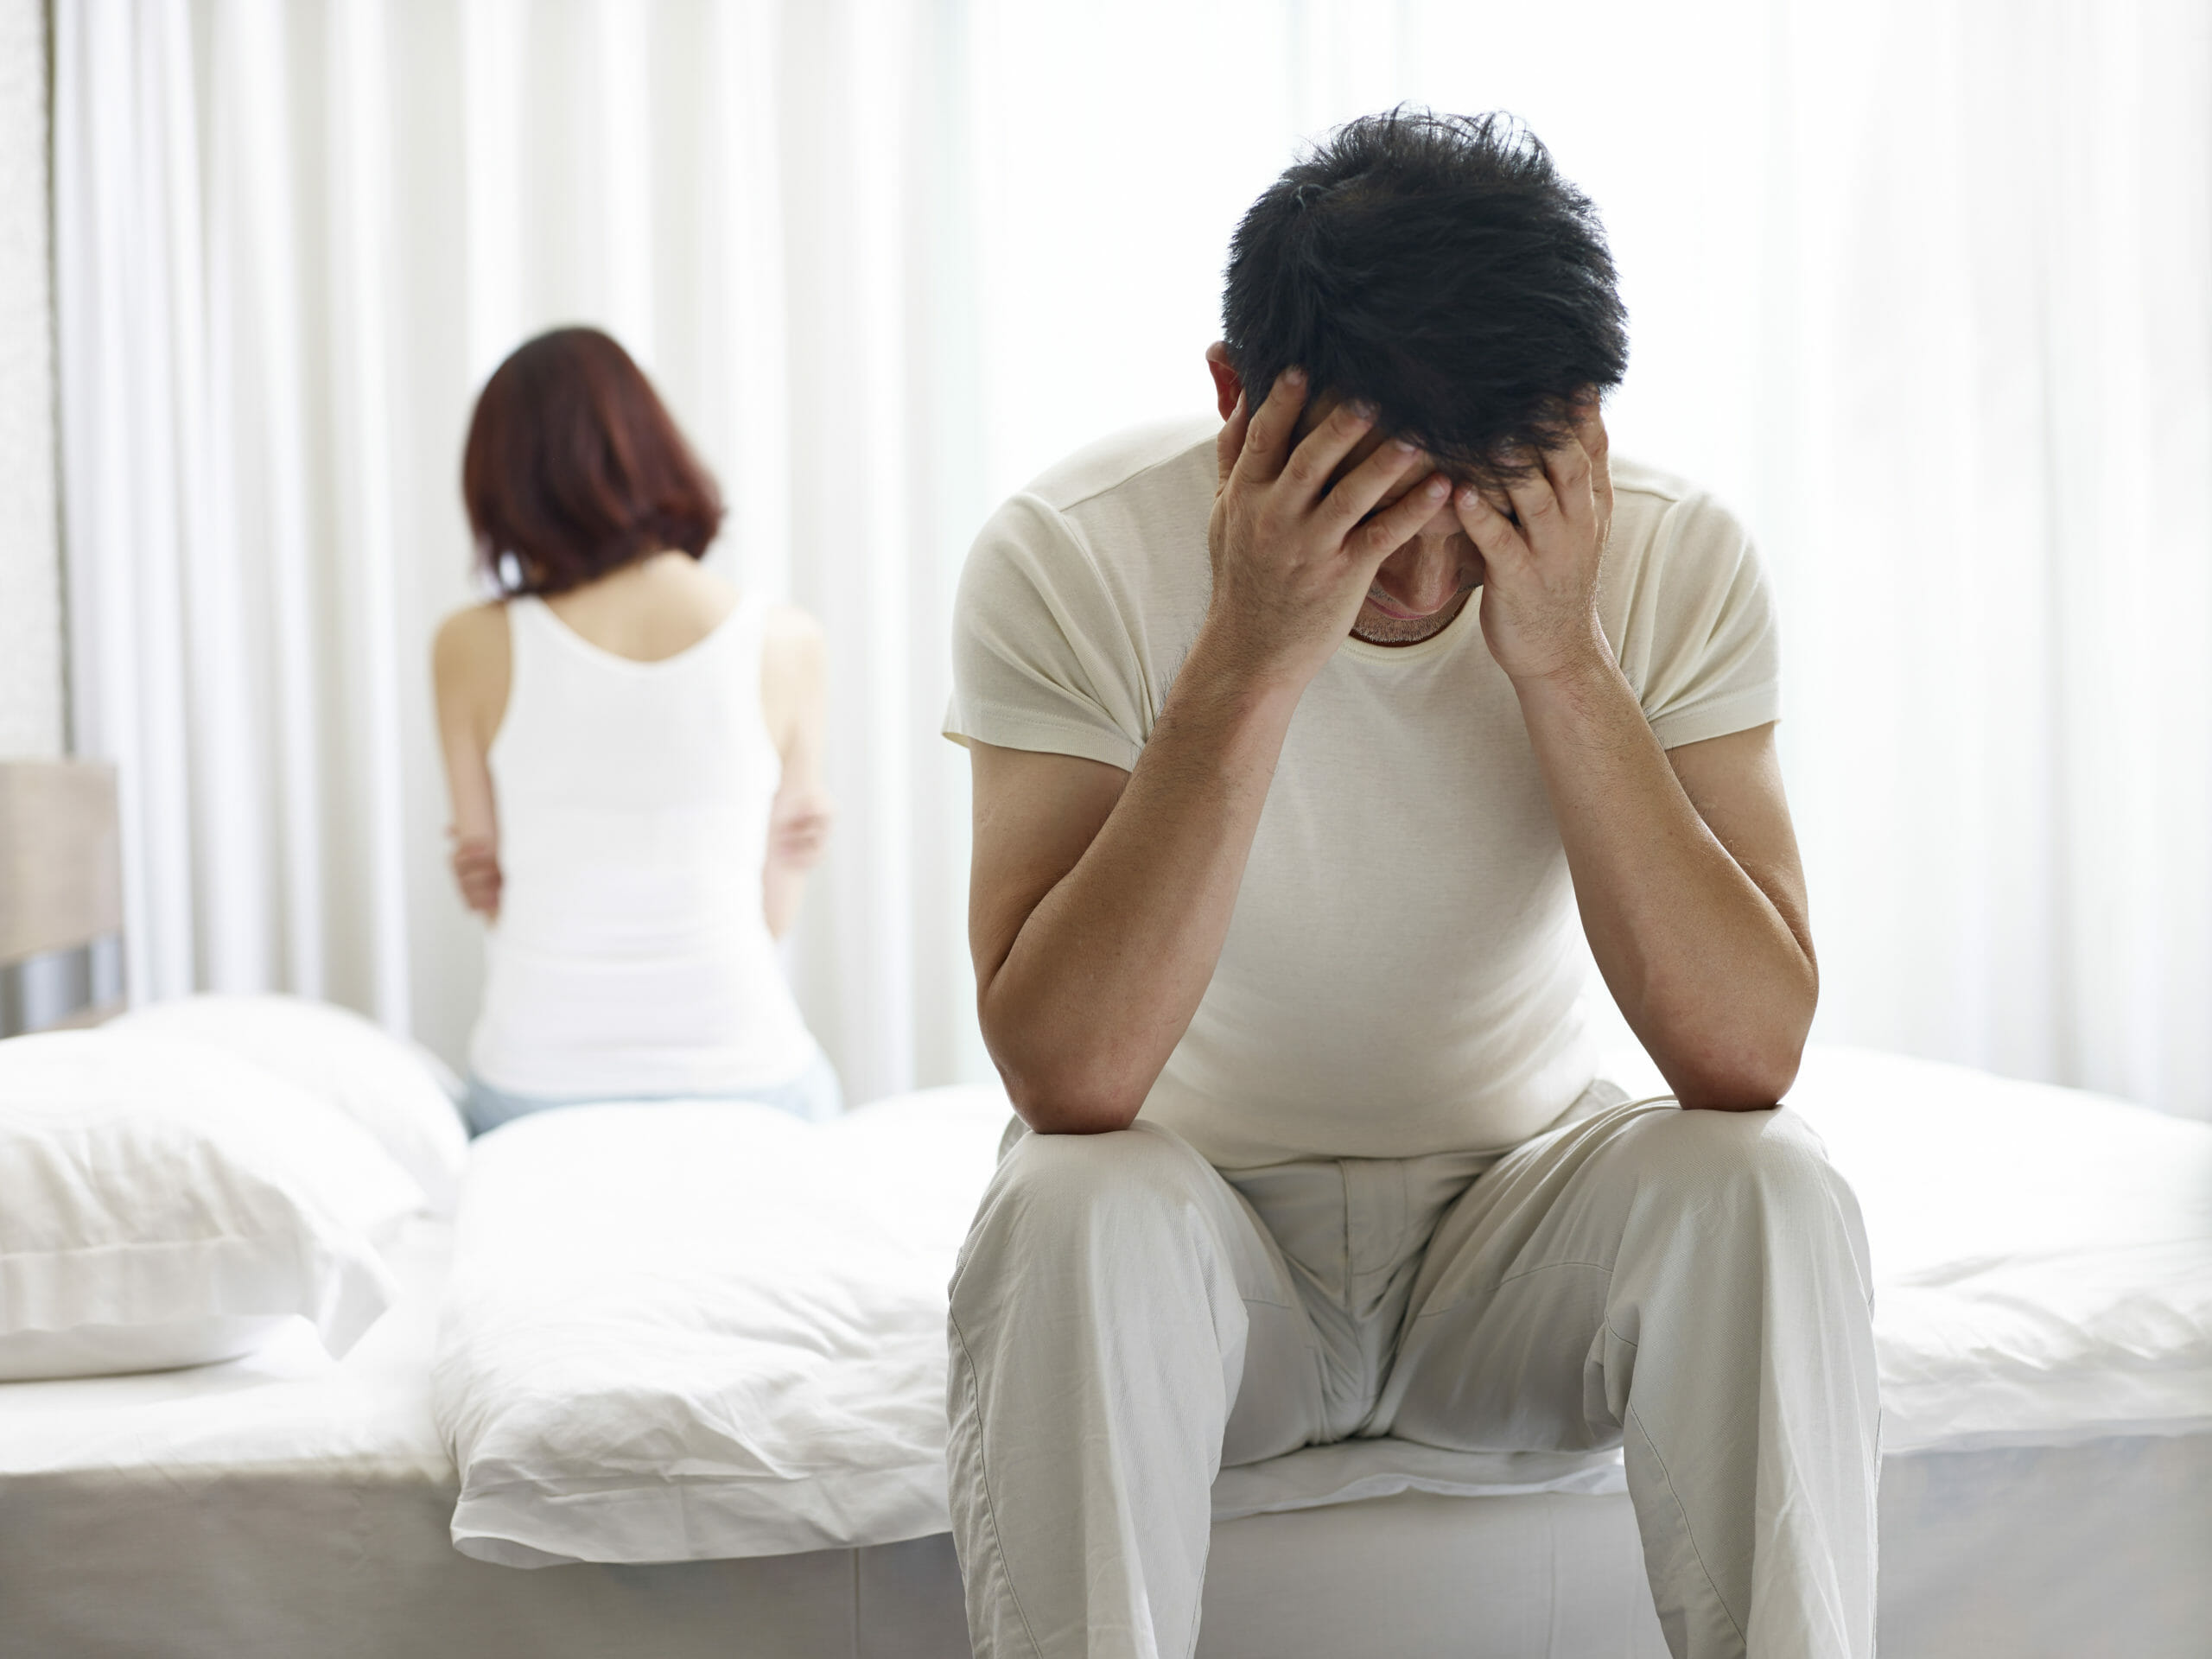 Can Substance Abuse & Addiction Lead to Infidelity?